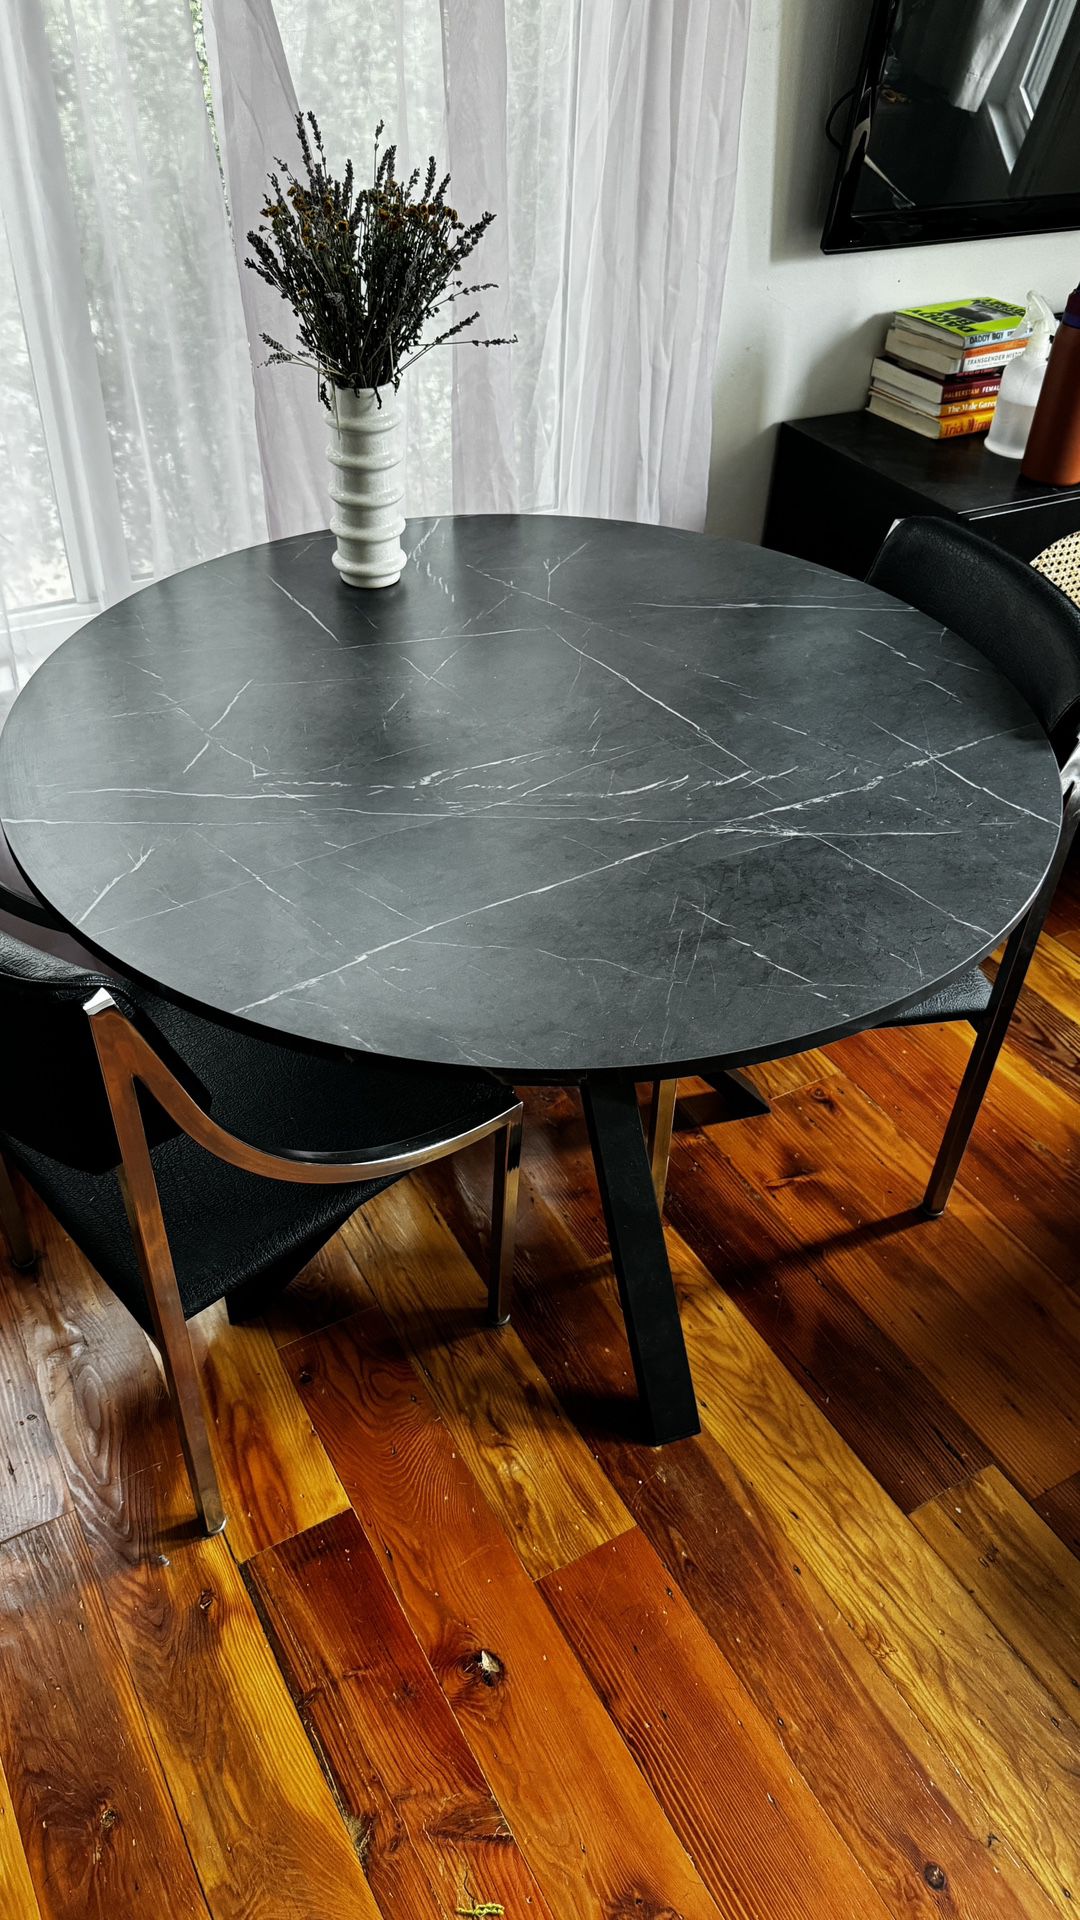 MARIEDAMM IKEA table with black marbled effect